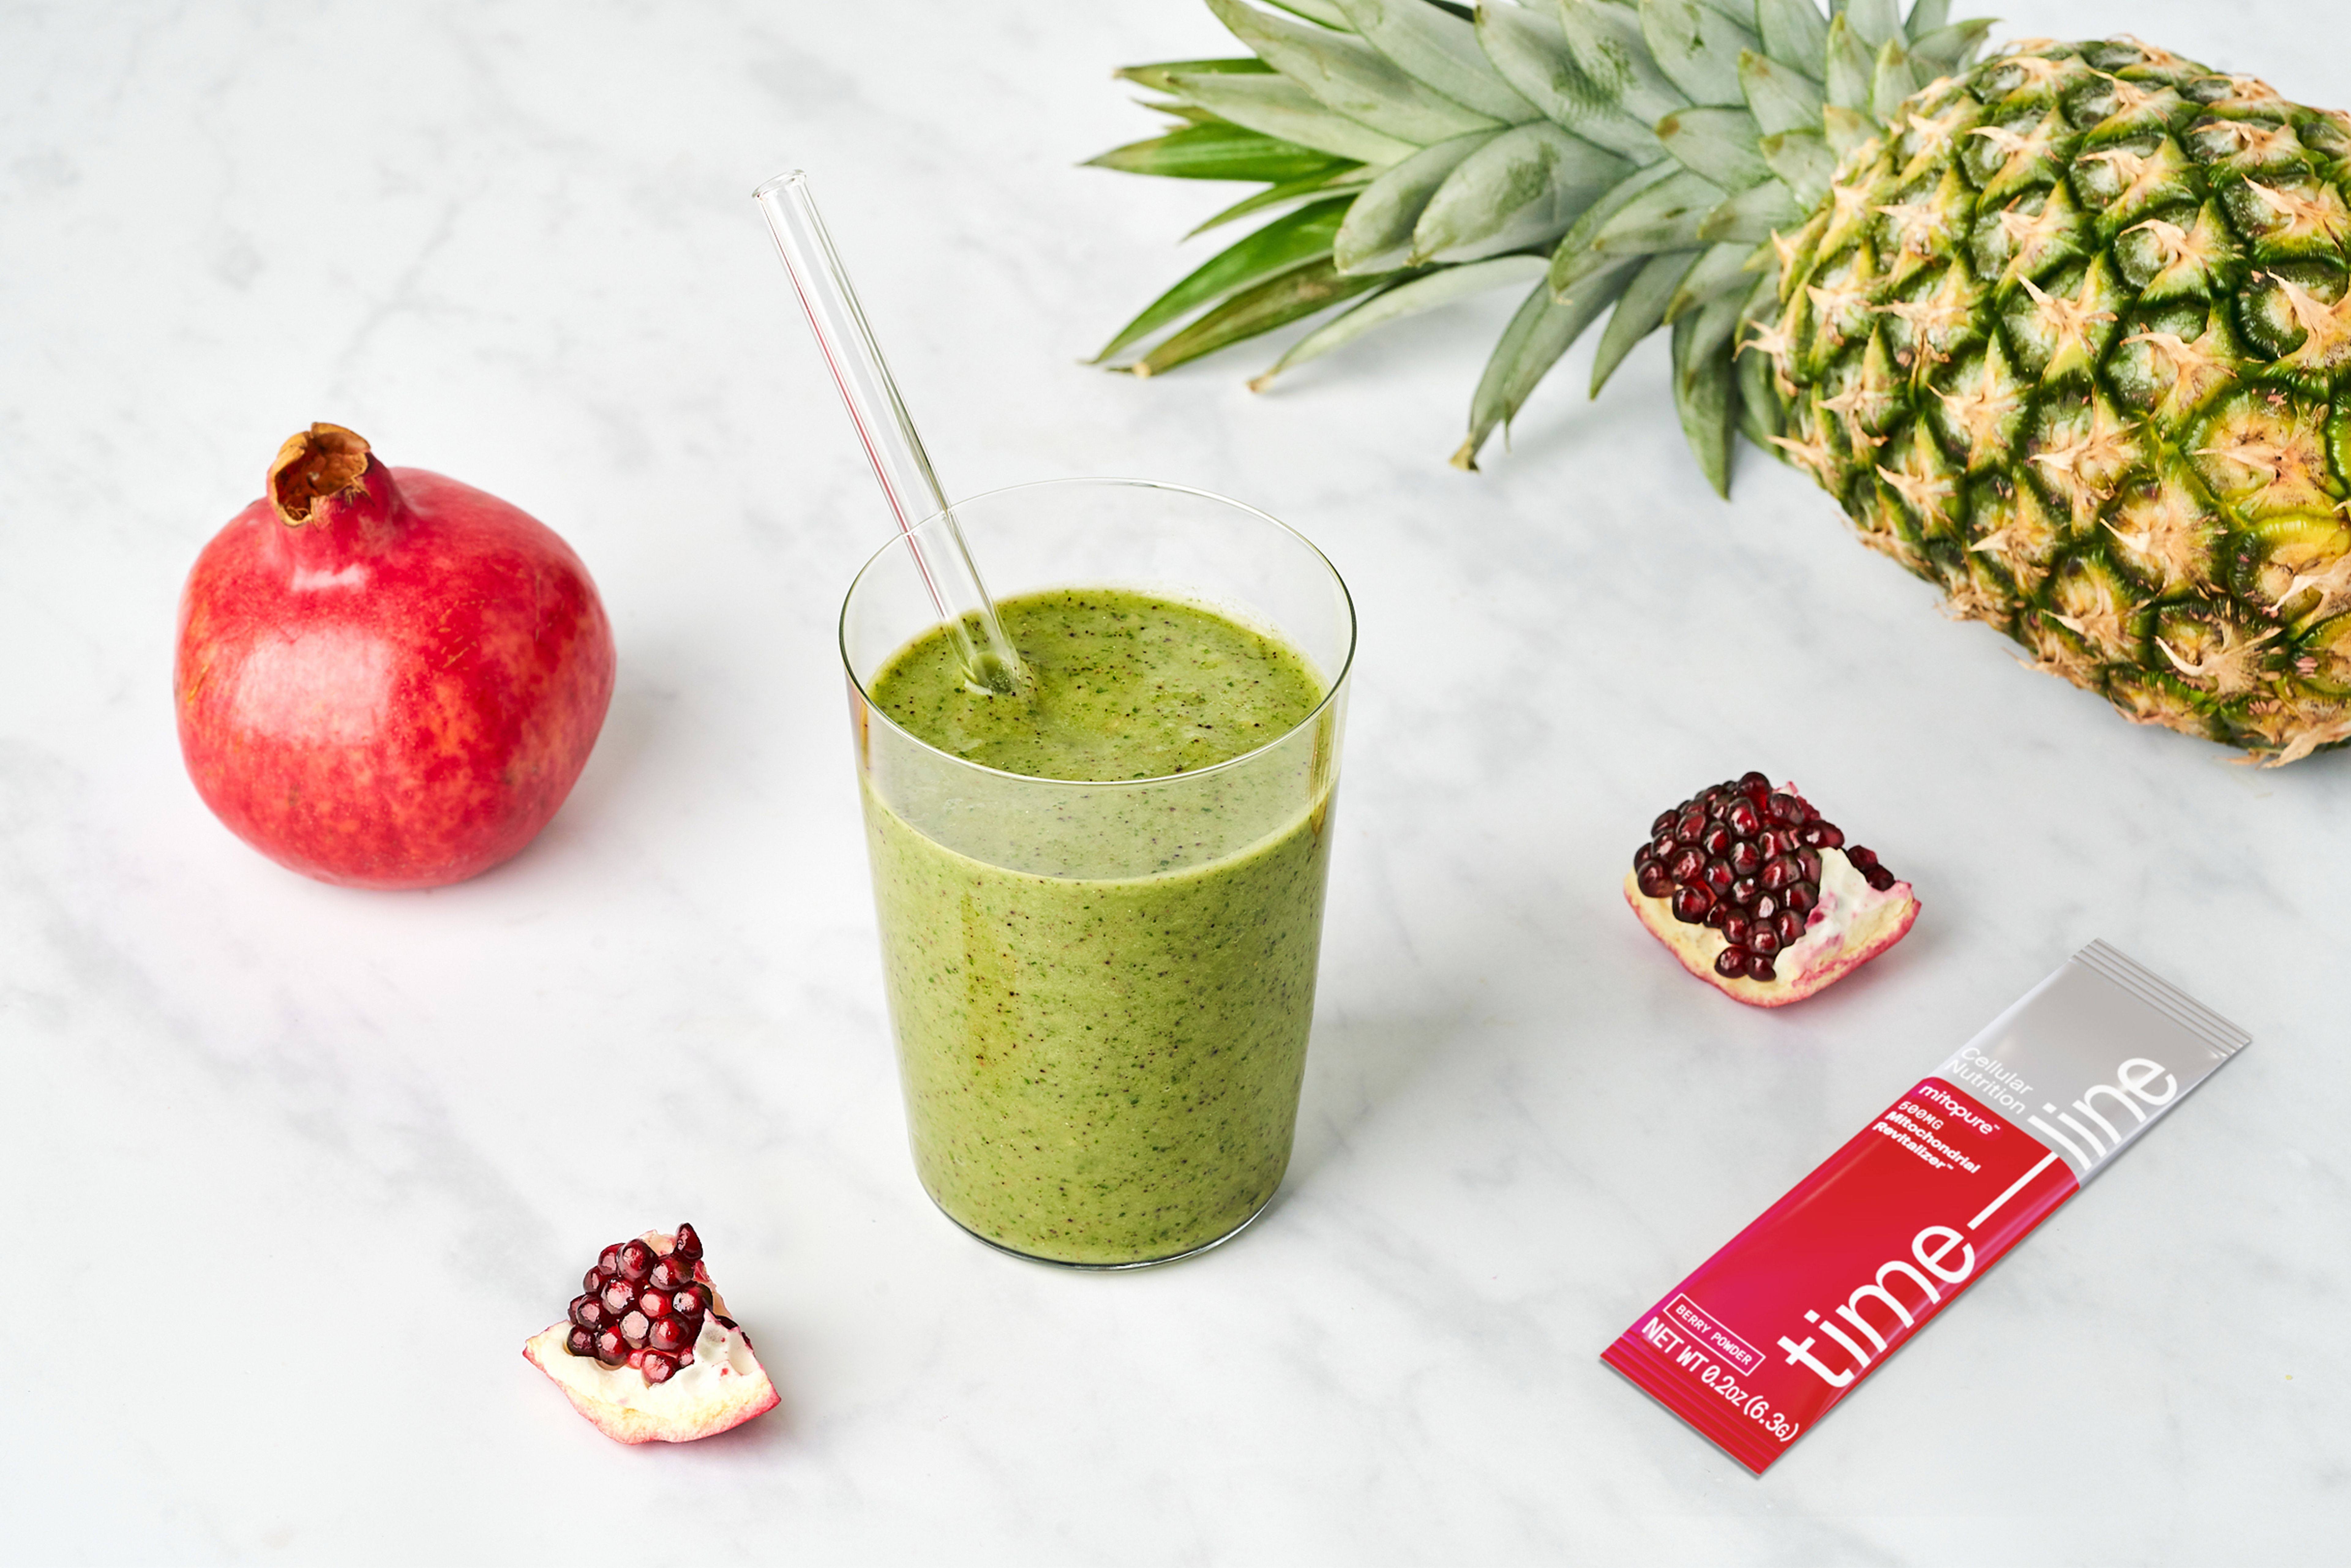 Pomegranate and Pineapple Smoothie with Mitopure